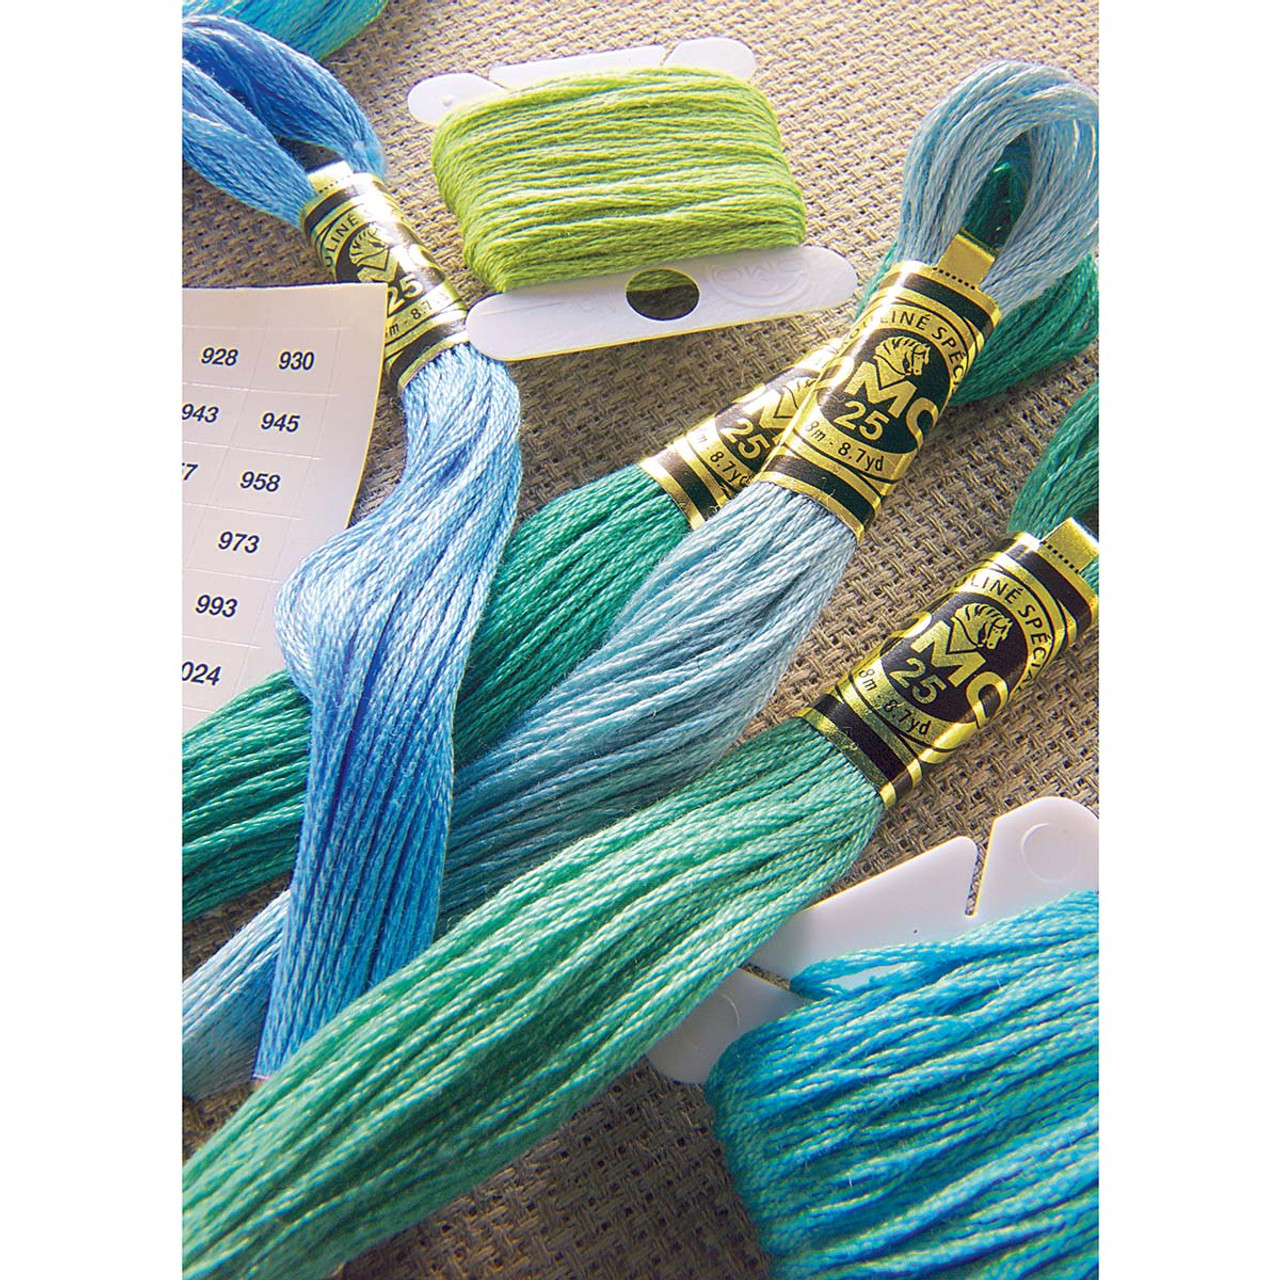 995 TURQUOISE Ocean Blue DMC Embroidery Thread Floss Lot of 5 Skeins NEW